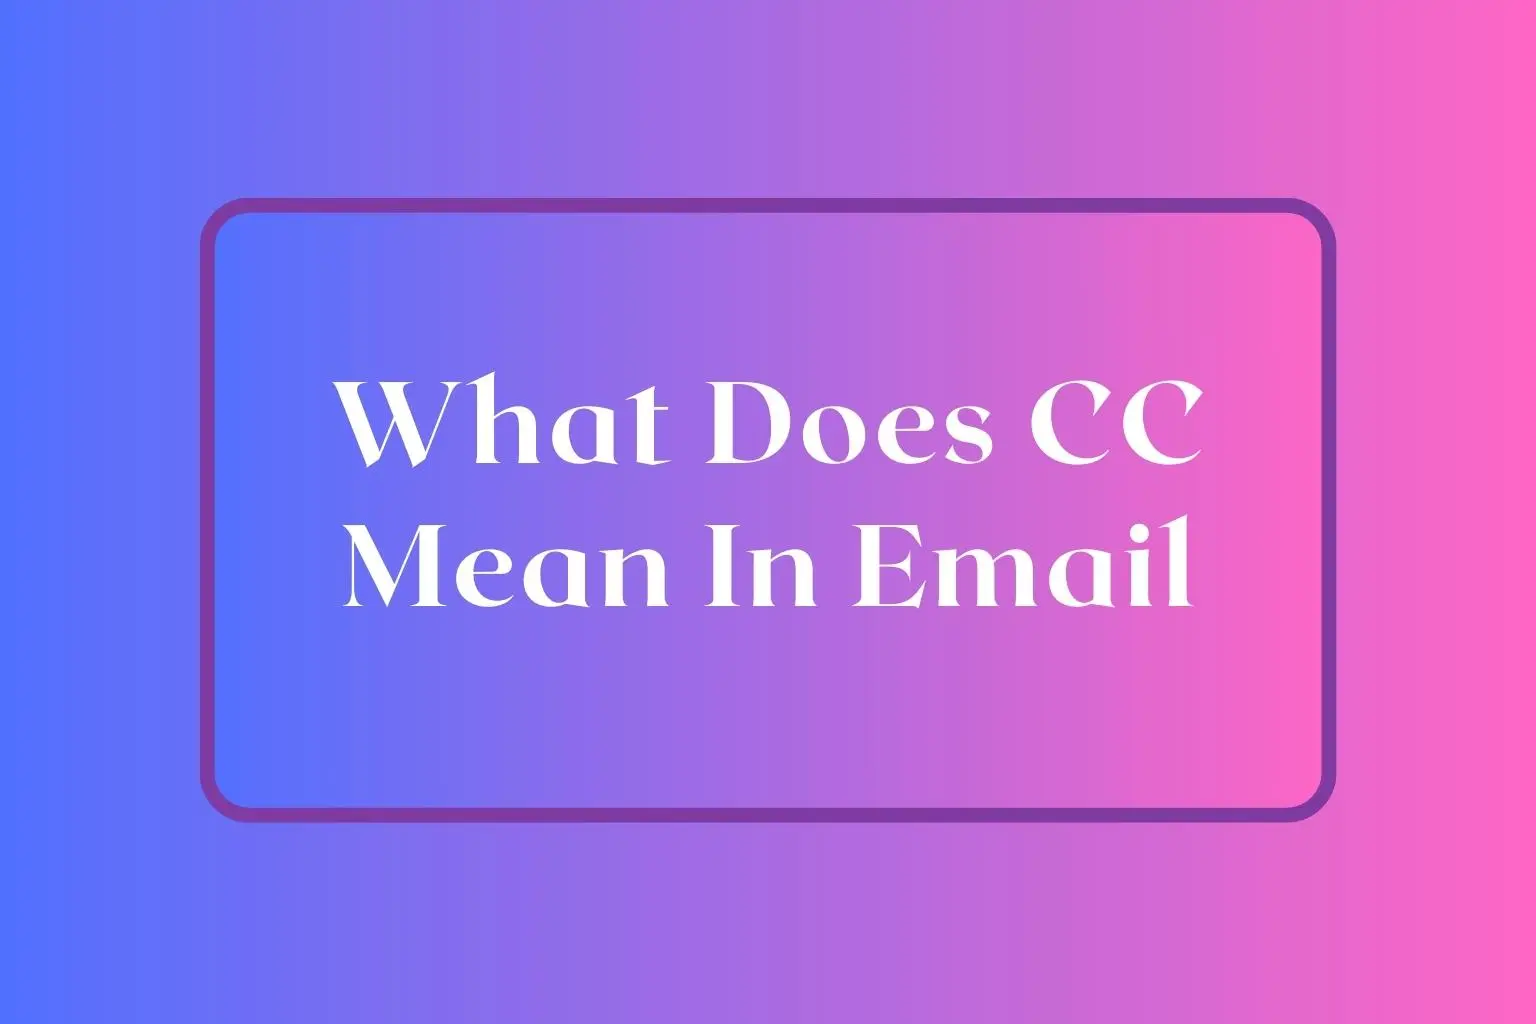 What Does CC Mean In Email